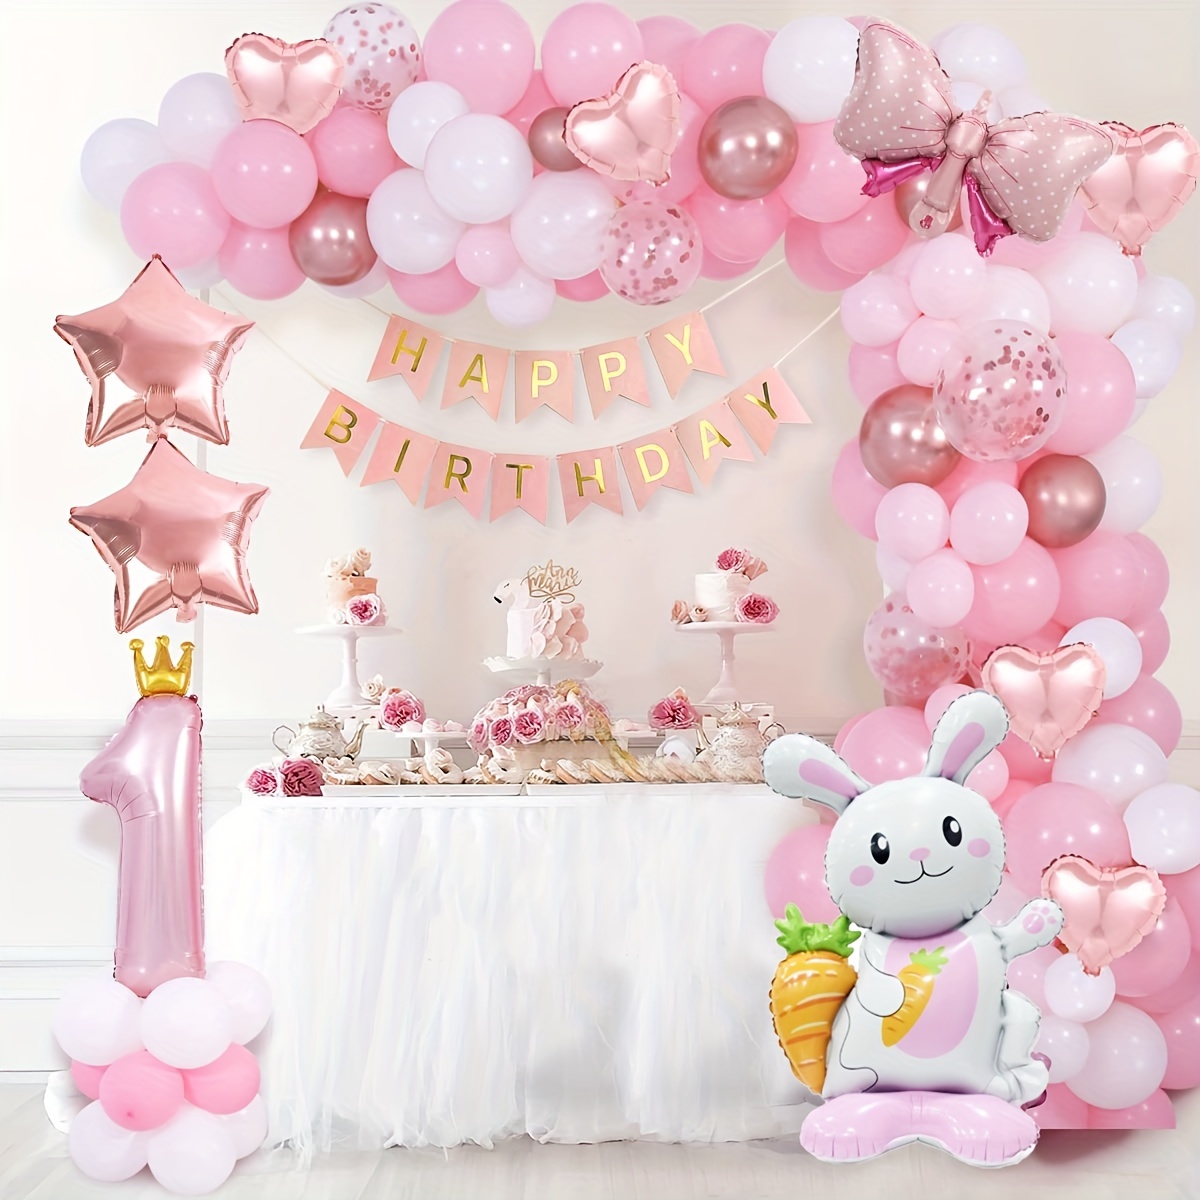 1st Birthday Party Decorations ❤ Party Decorations, Party & Birthday  Decorations Party Supplies and Decor Services. 📞 0714809556  #birthdaydecoration, By Party Decor